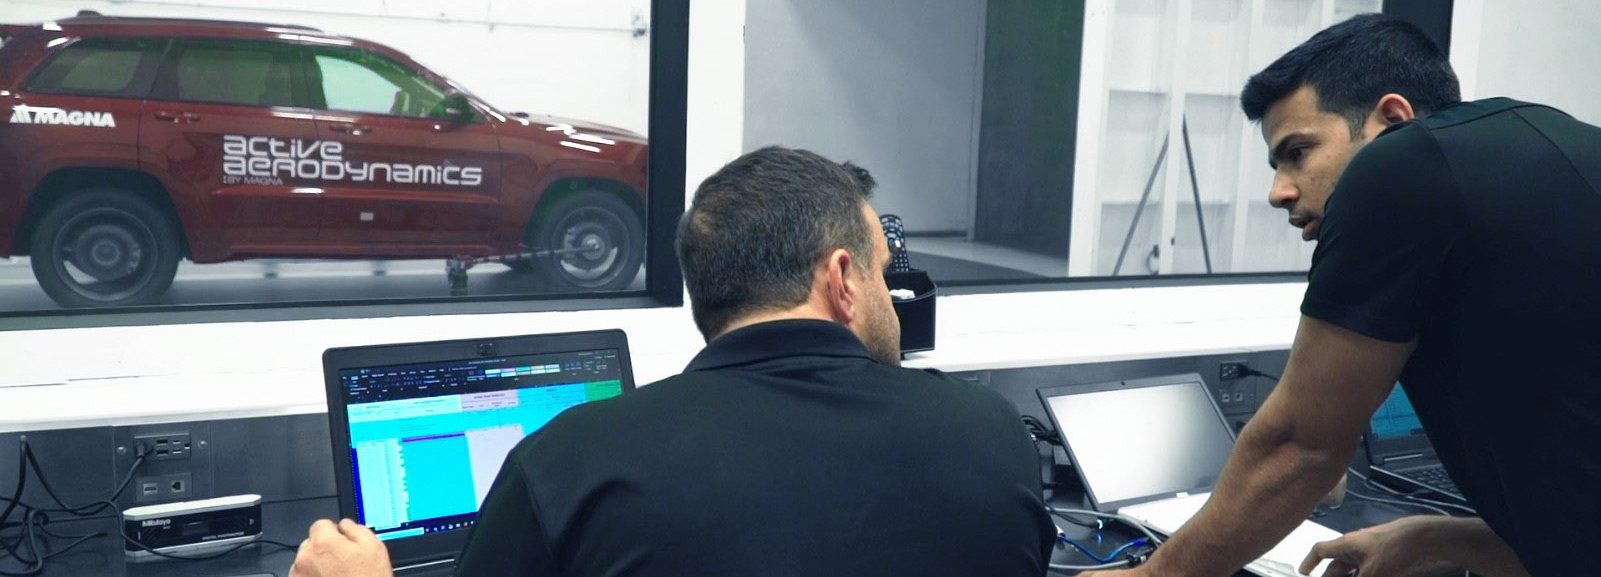 Two colleagues discussing in a car lab